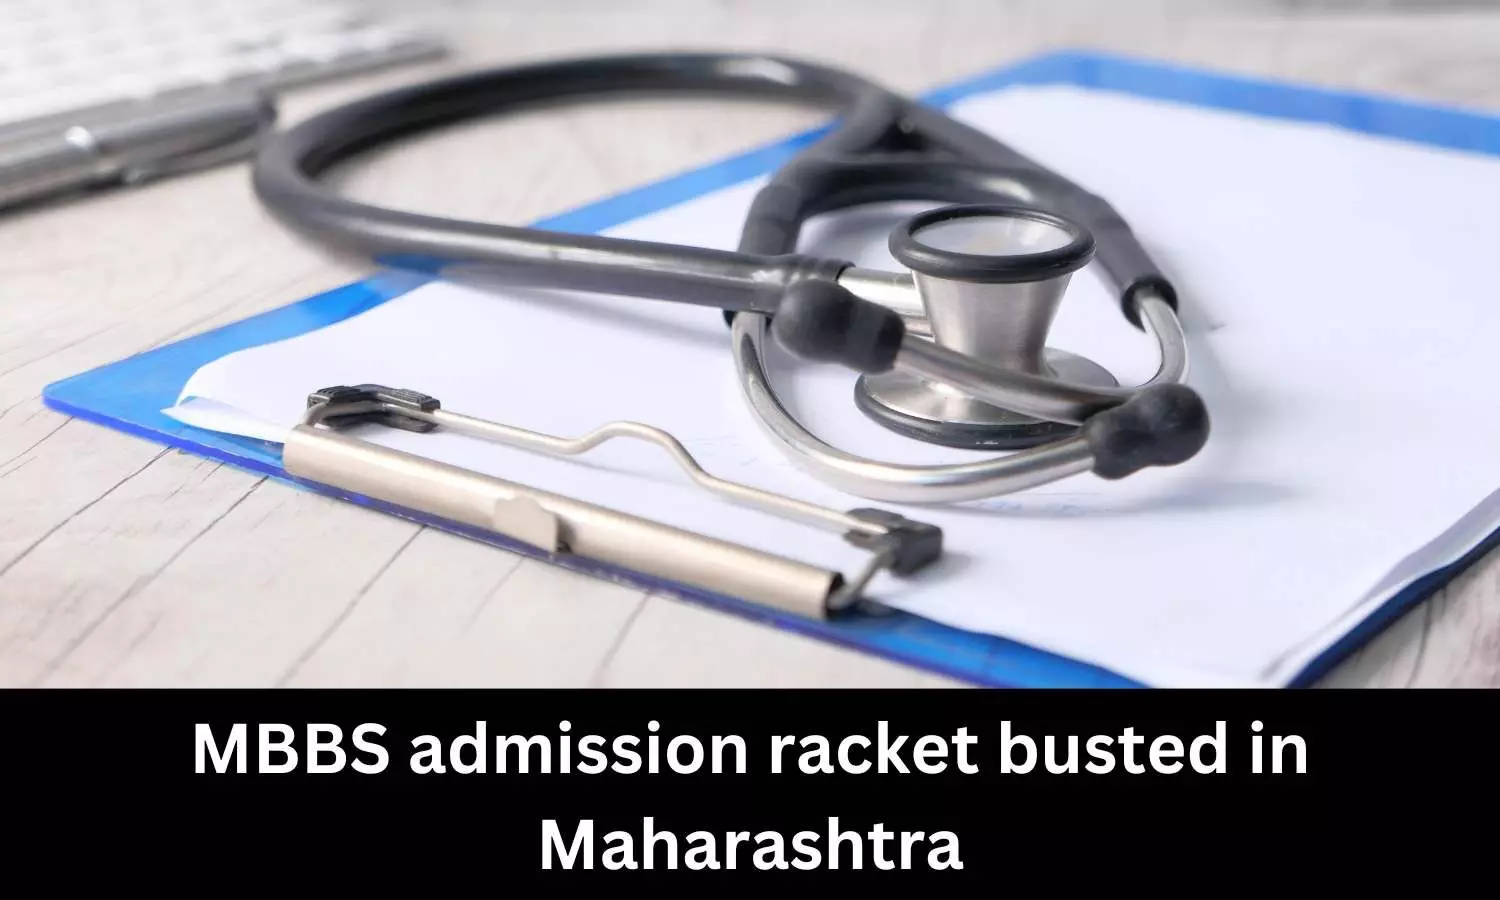 MBBS admission scam busted in Maharashtra, 5 arrested